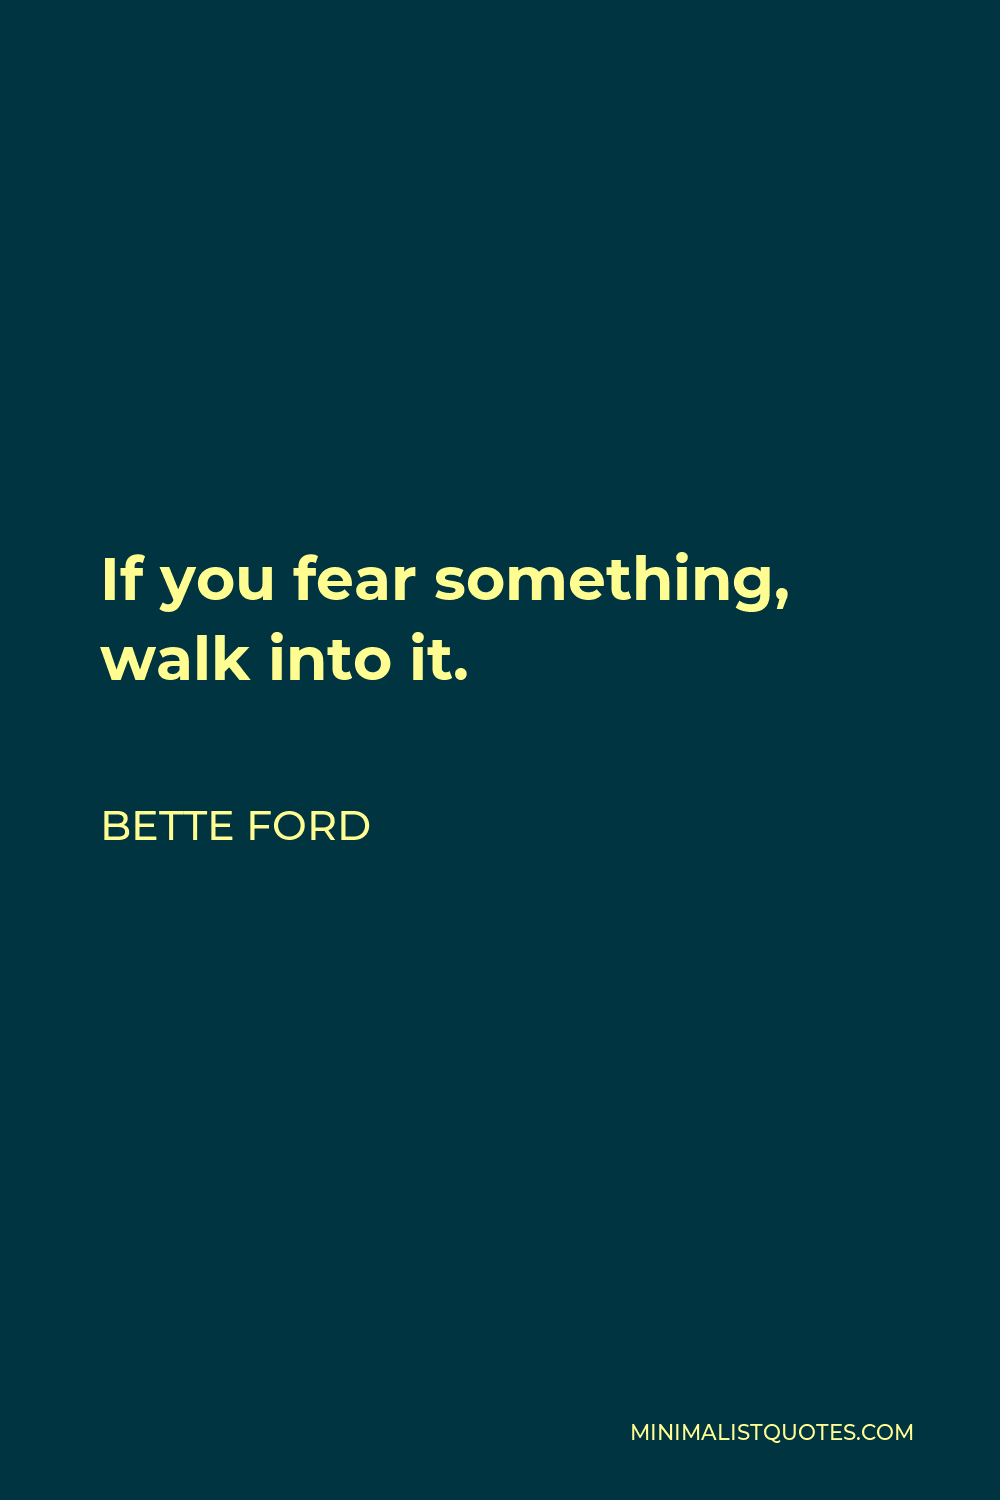 Bette Ford Quote - If you fear something, walk into it.